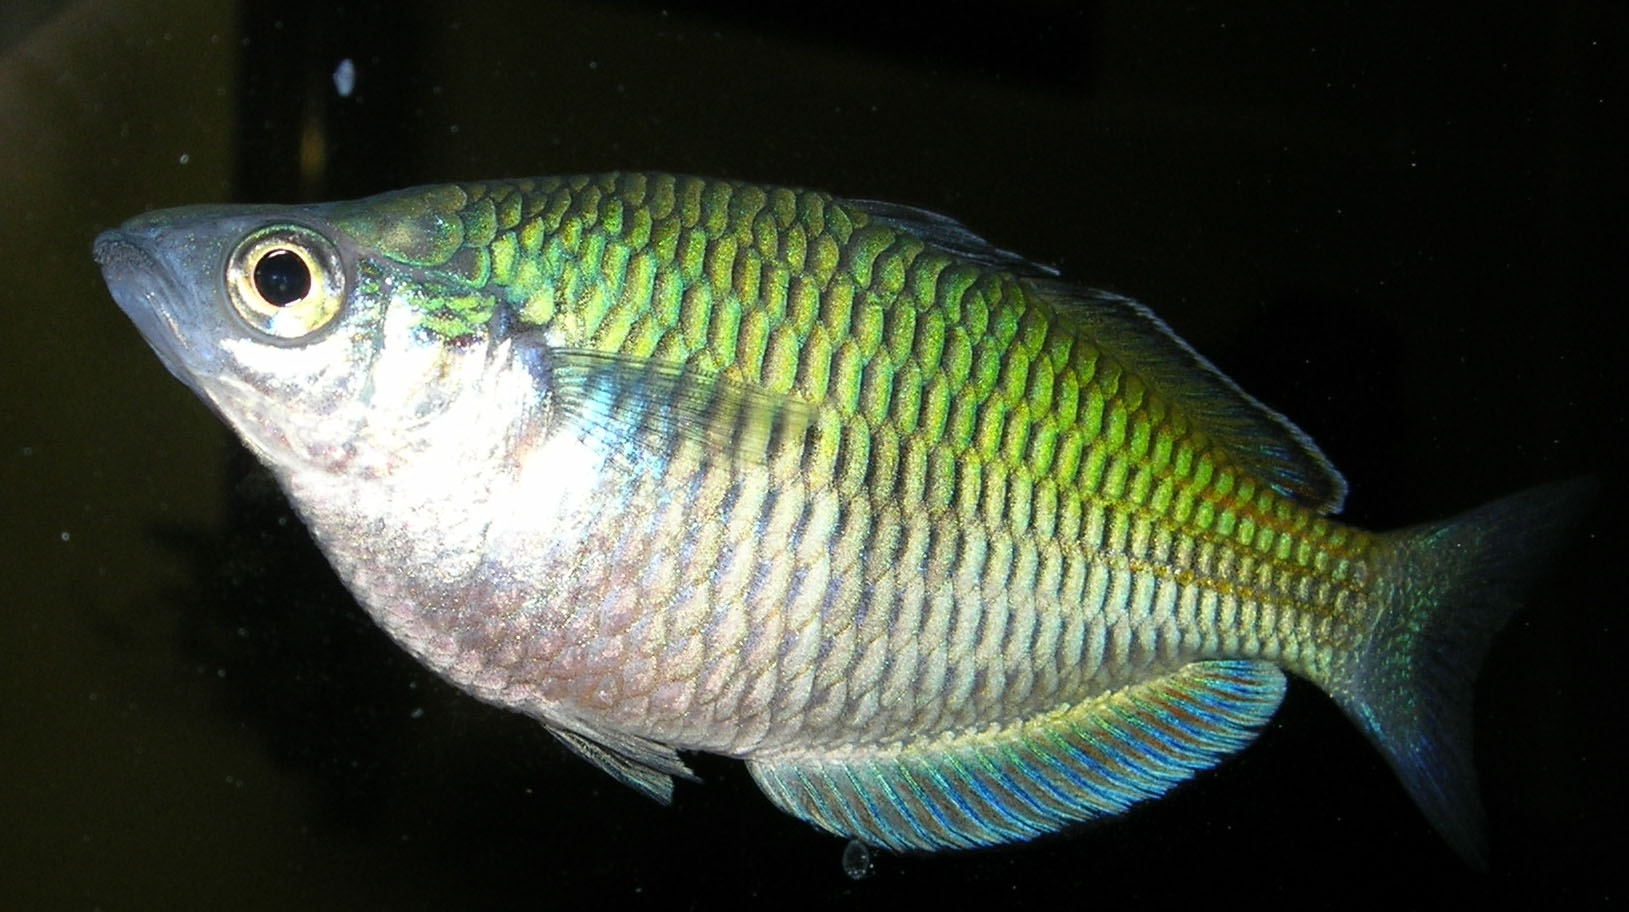 Just got a new camera, going to upload all the new photos!
This is Bo, my BOesaumi rainBOw fish.  no pun intended... really... 
*drips sarcasim*
200 I